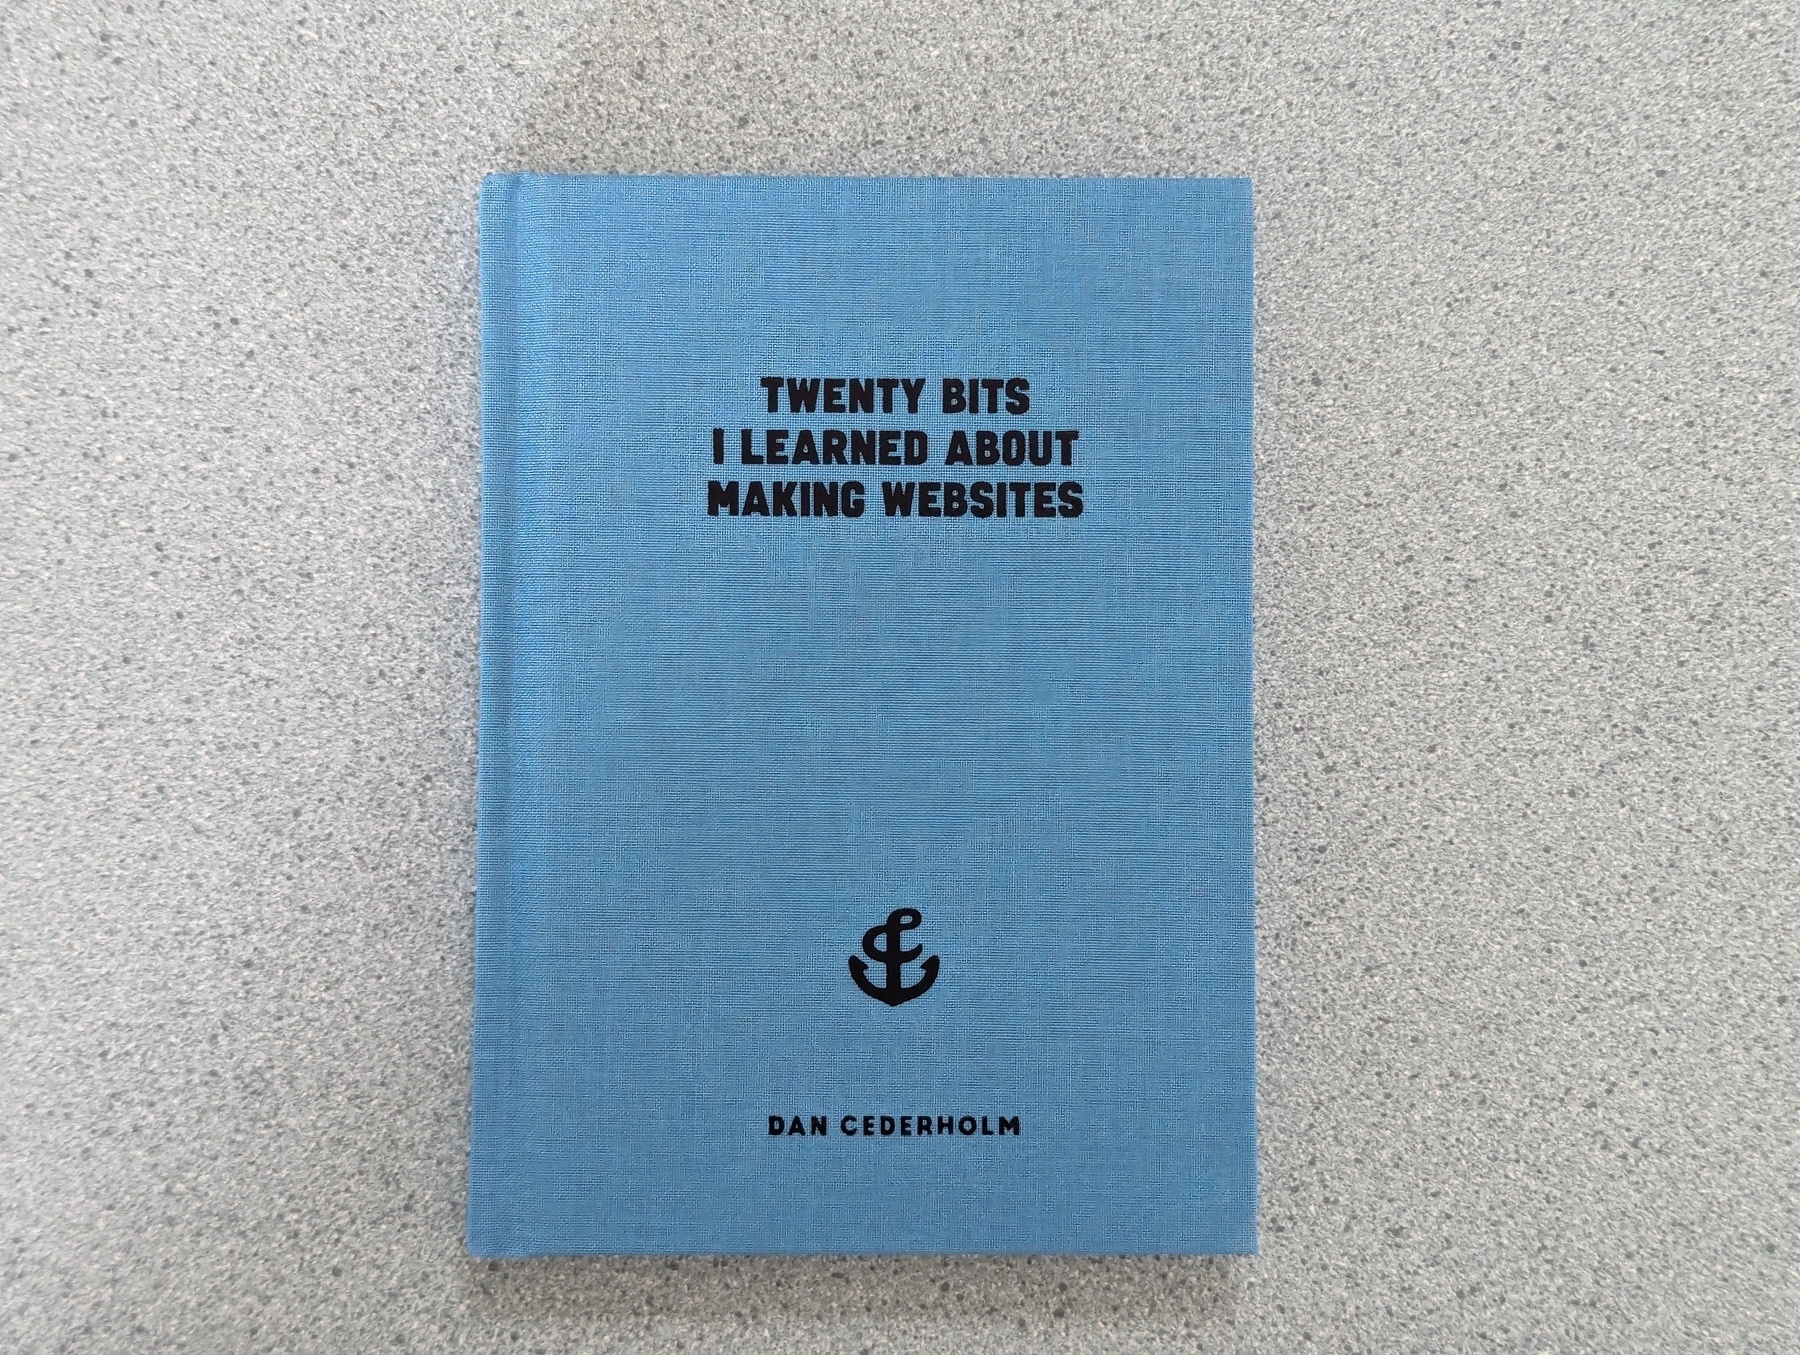 A blue book with the title Twenty Bits I Learned about Making Websites